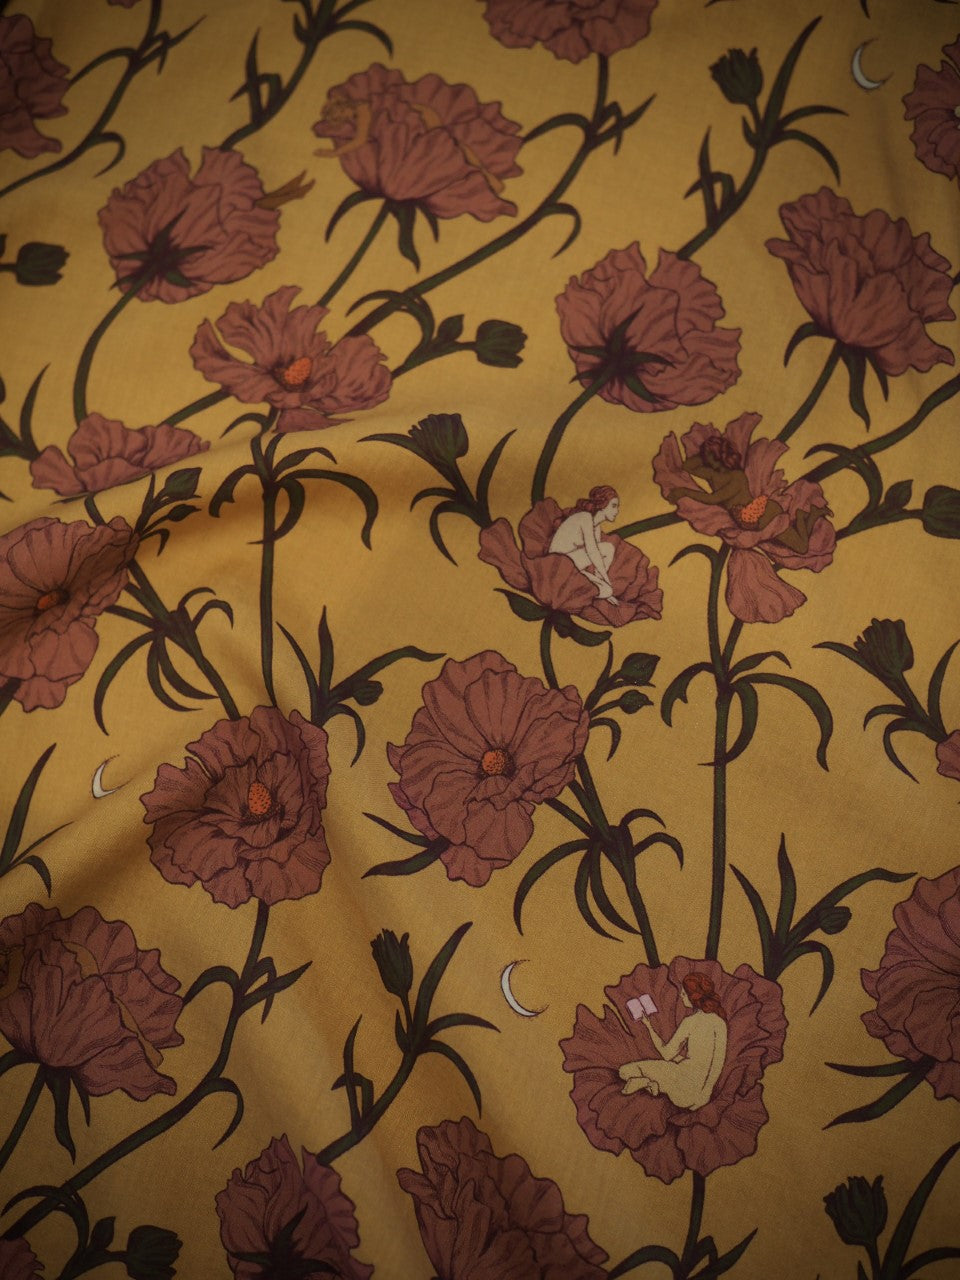 Lightweight eco-friendly Tencel fabric showing print of "The Women who Sleep Among the Flowers" in yellow and pink (yellow) colorway